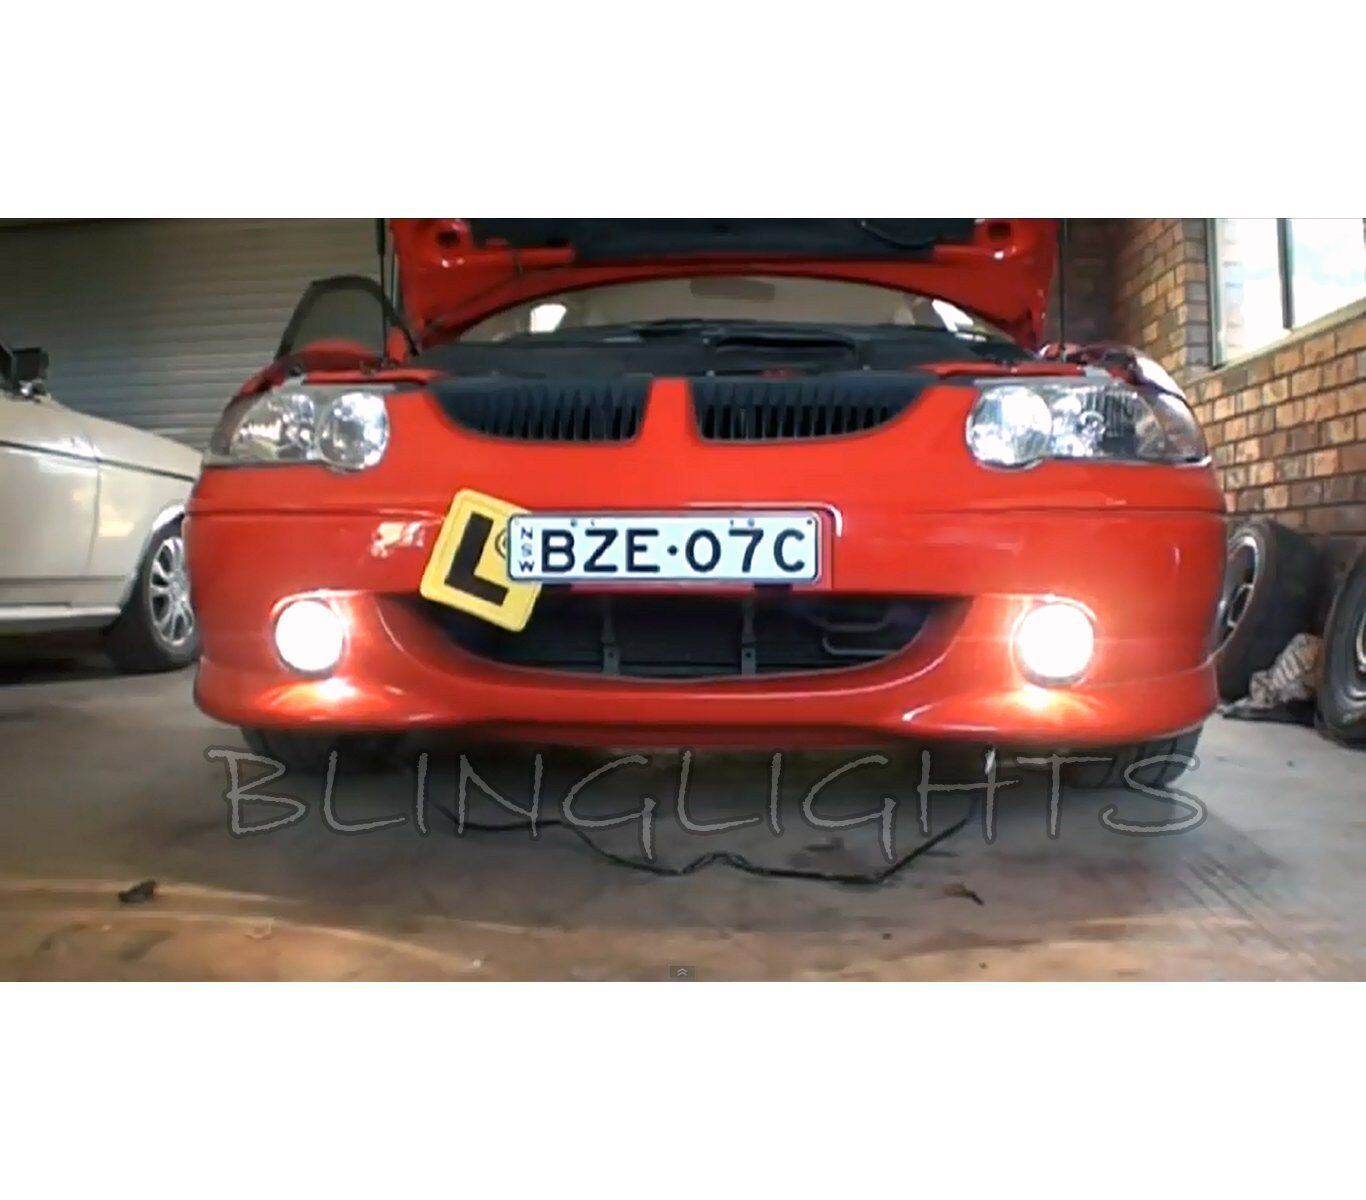 Primary image for Xenon Halogen Fog Lamps For 1997 1998 1999 2000 2001 2002 Holden VT VX Commodore